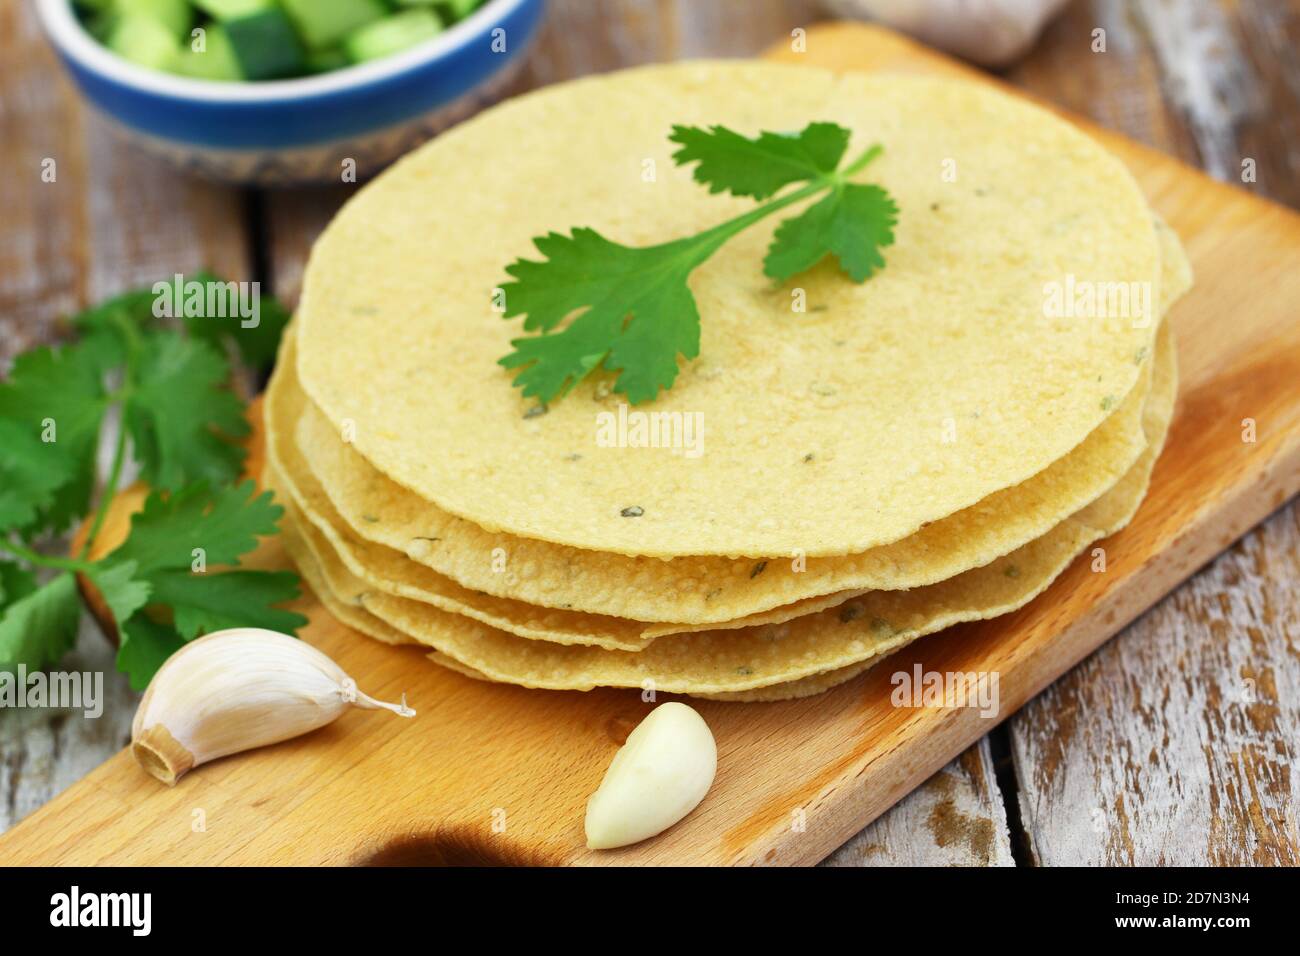 papadum, Indian, snack, deep fried, stack, crunchy, salty, spicy, wood, wooden, heap, rustic, ready made, appetizer, starter Stock Photo